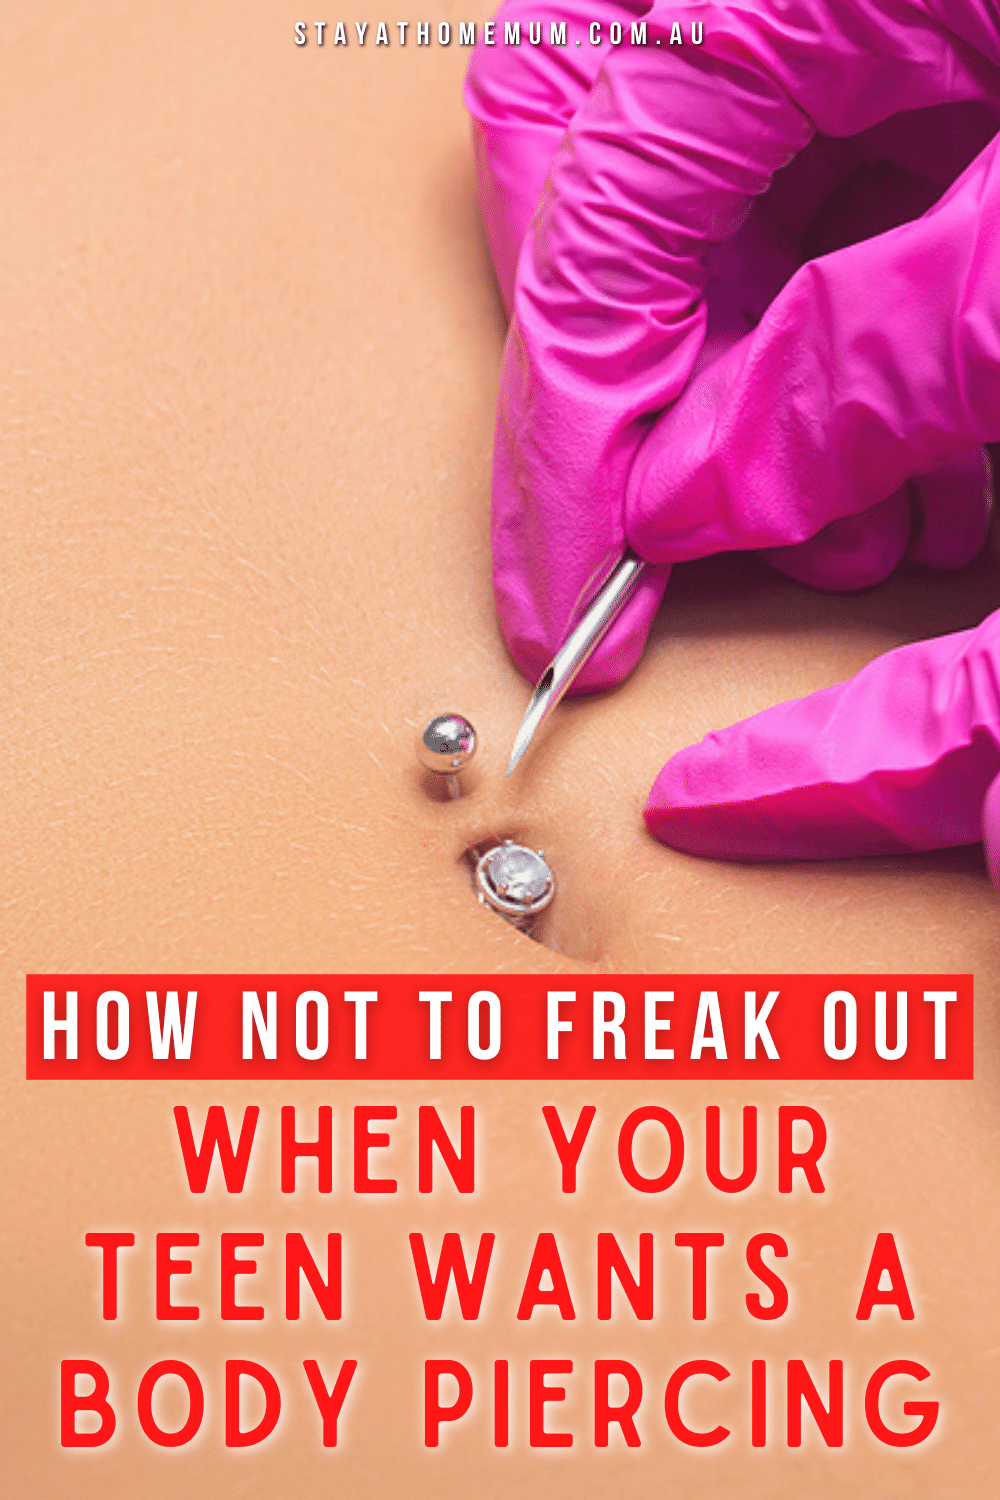 How Not To Freak Out When Your Teen Wants A Body Piercing | Stay At Home Mum